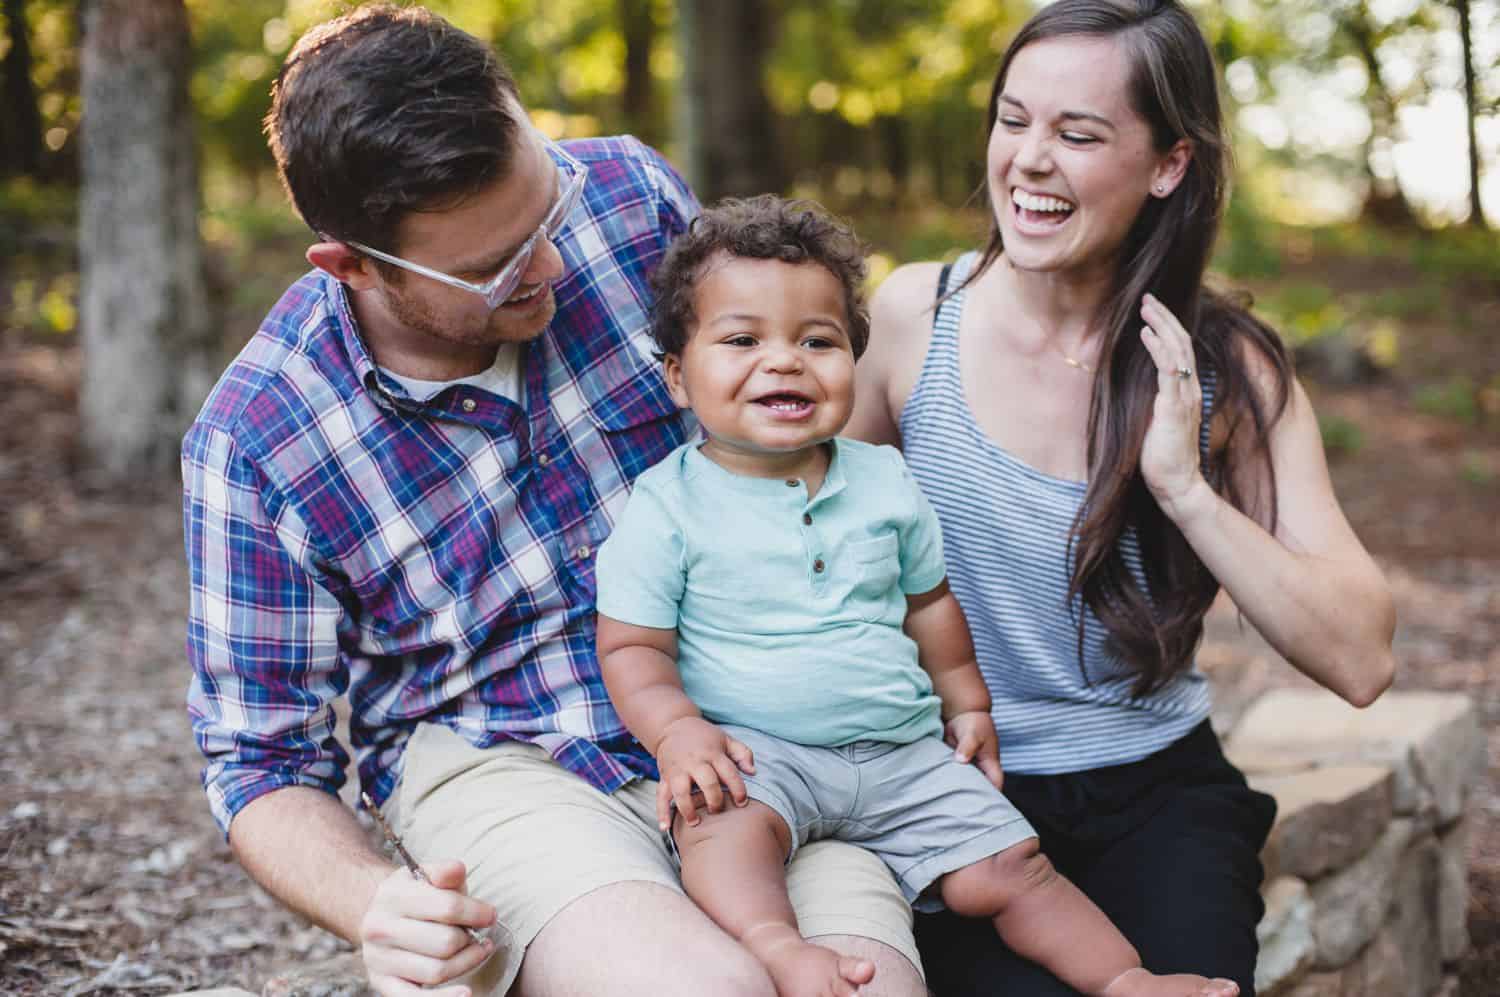 Two parents sit with their smiling toddler in a park.